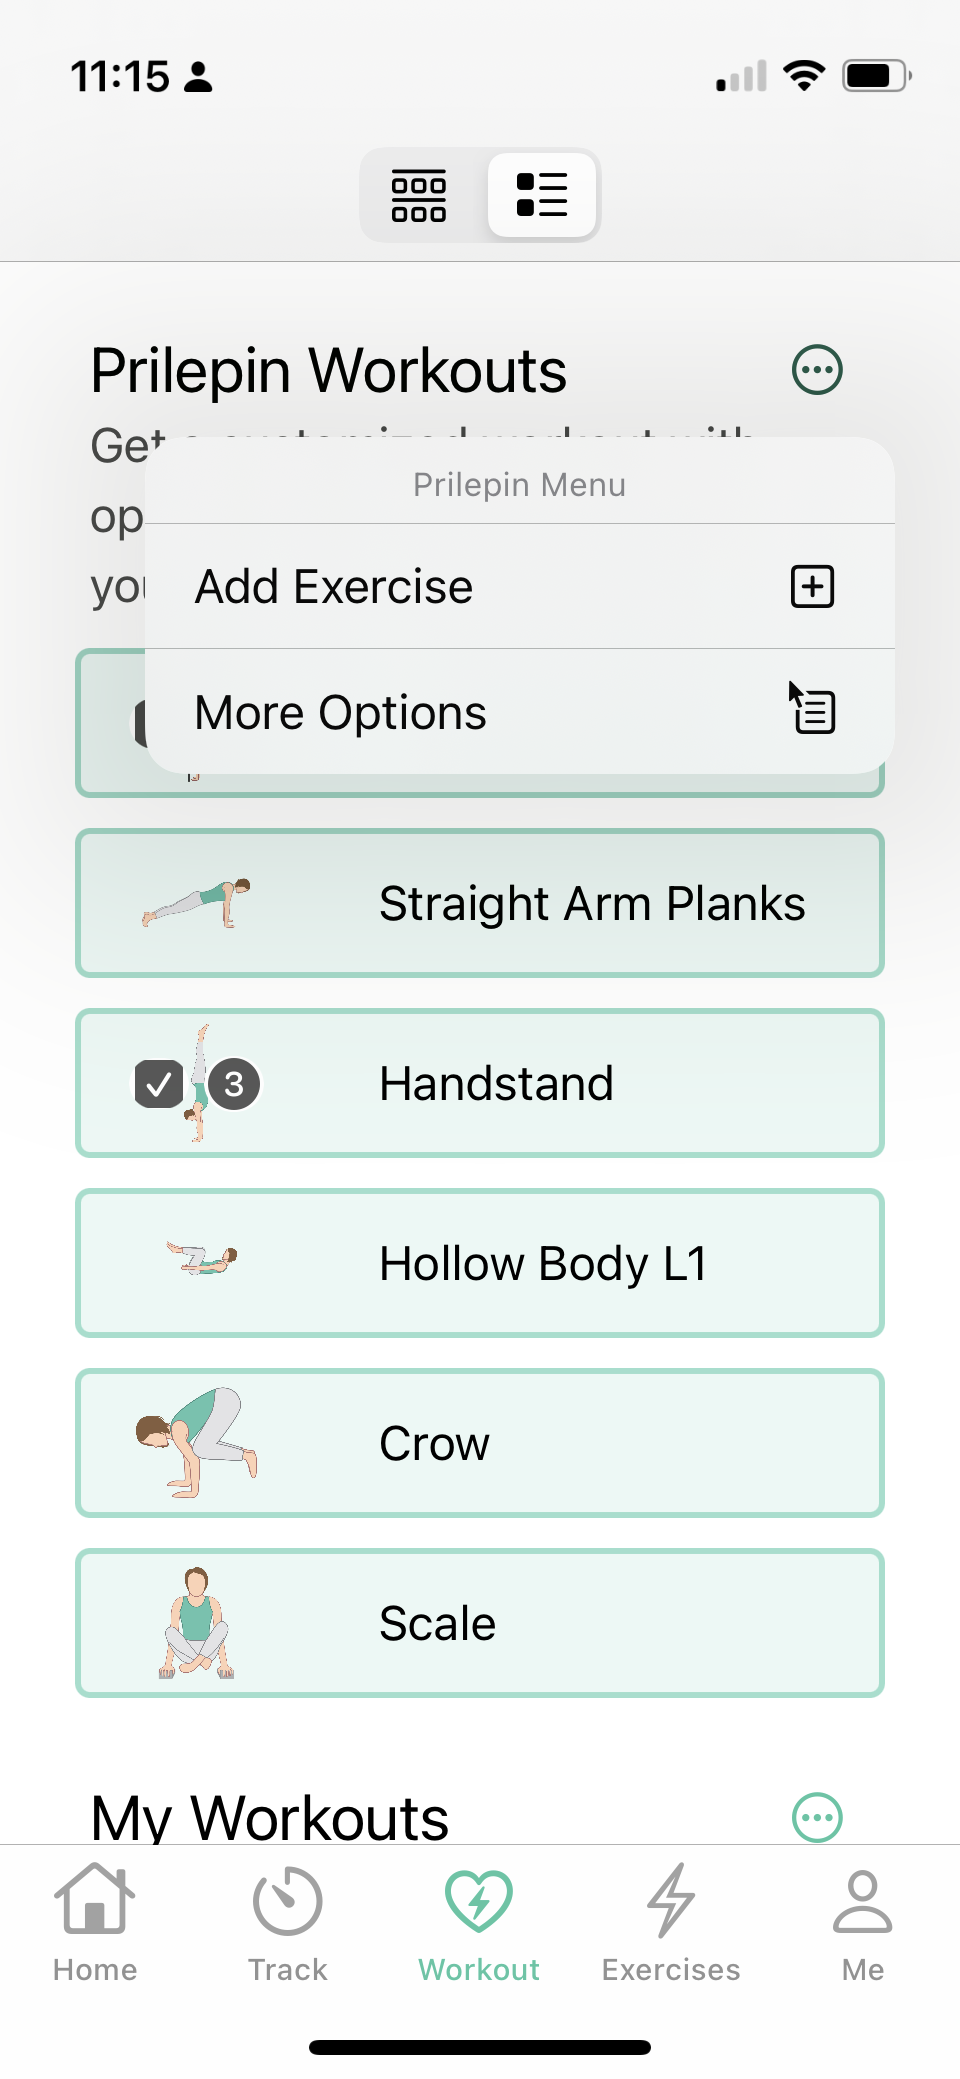 Prilepin Exercises in Workout List